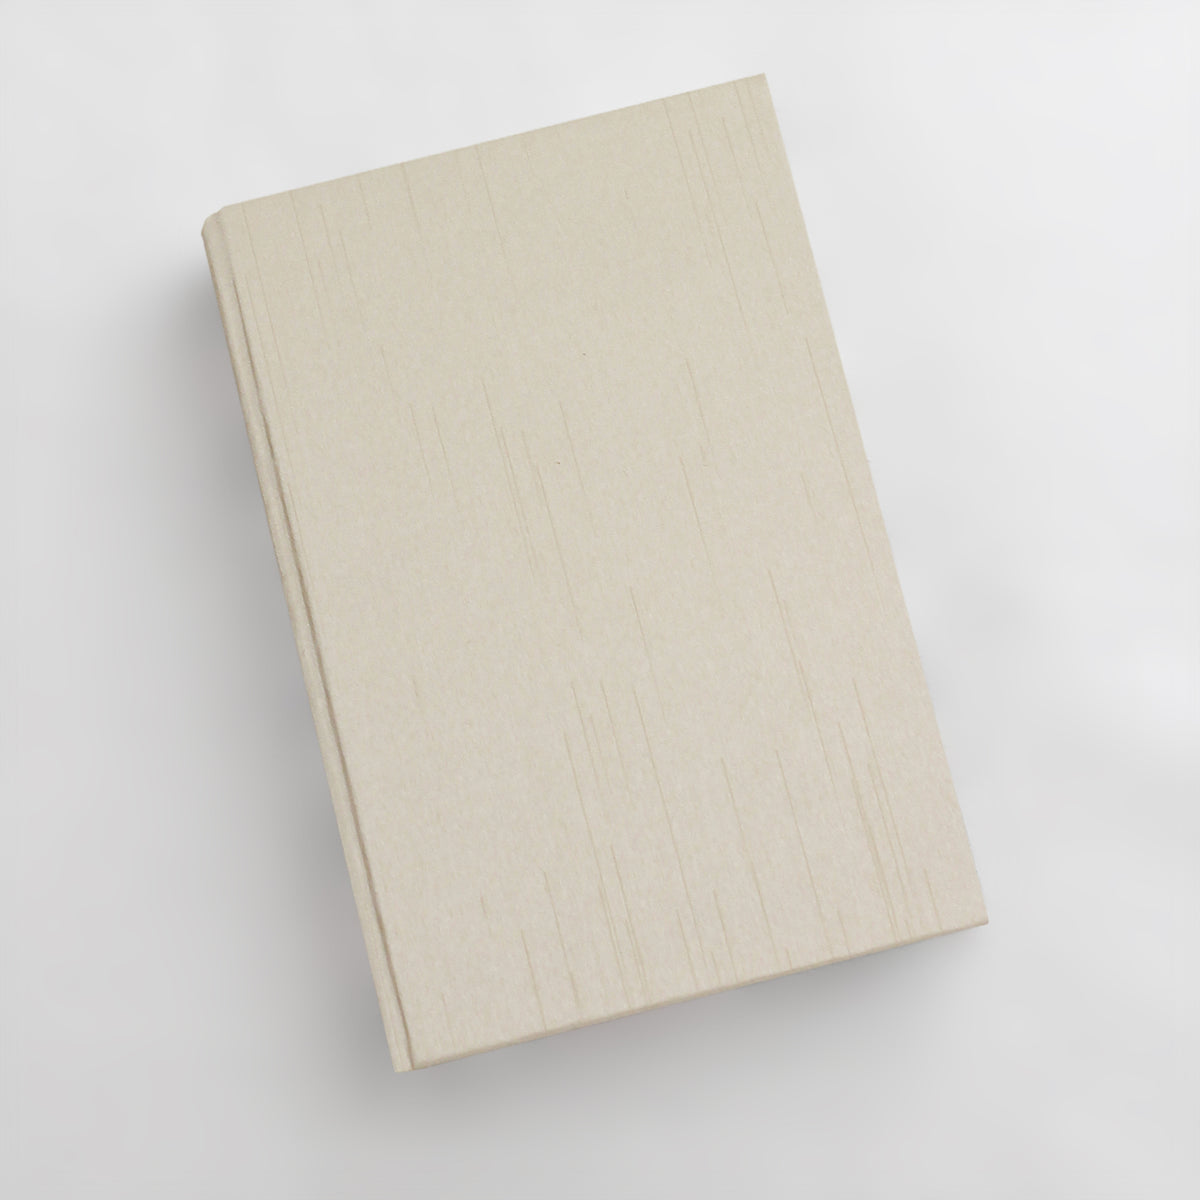 Medium 5.5x8.5 Blank Page Journal | Cover: Champagne Silk | Available Personalized